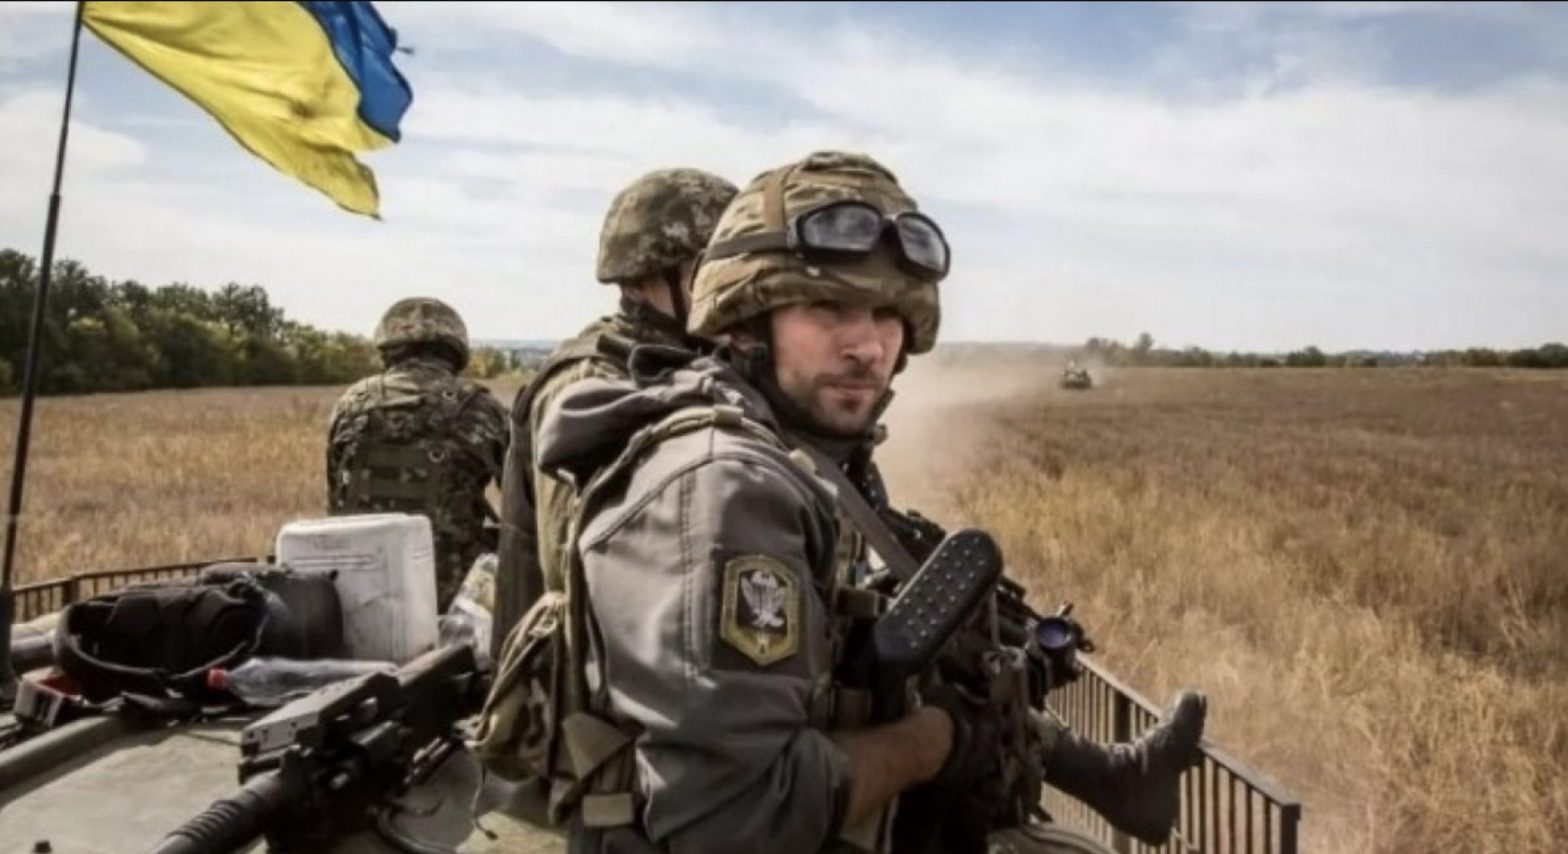 Ukrainian Counteroffensive Rattles Russian Forces: An Analysis of the Eastern Front